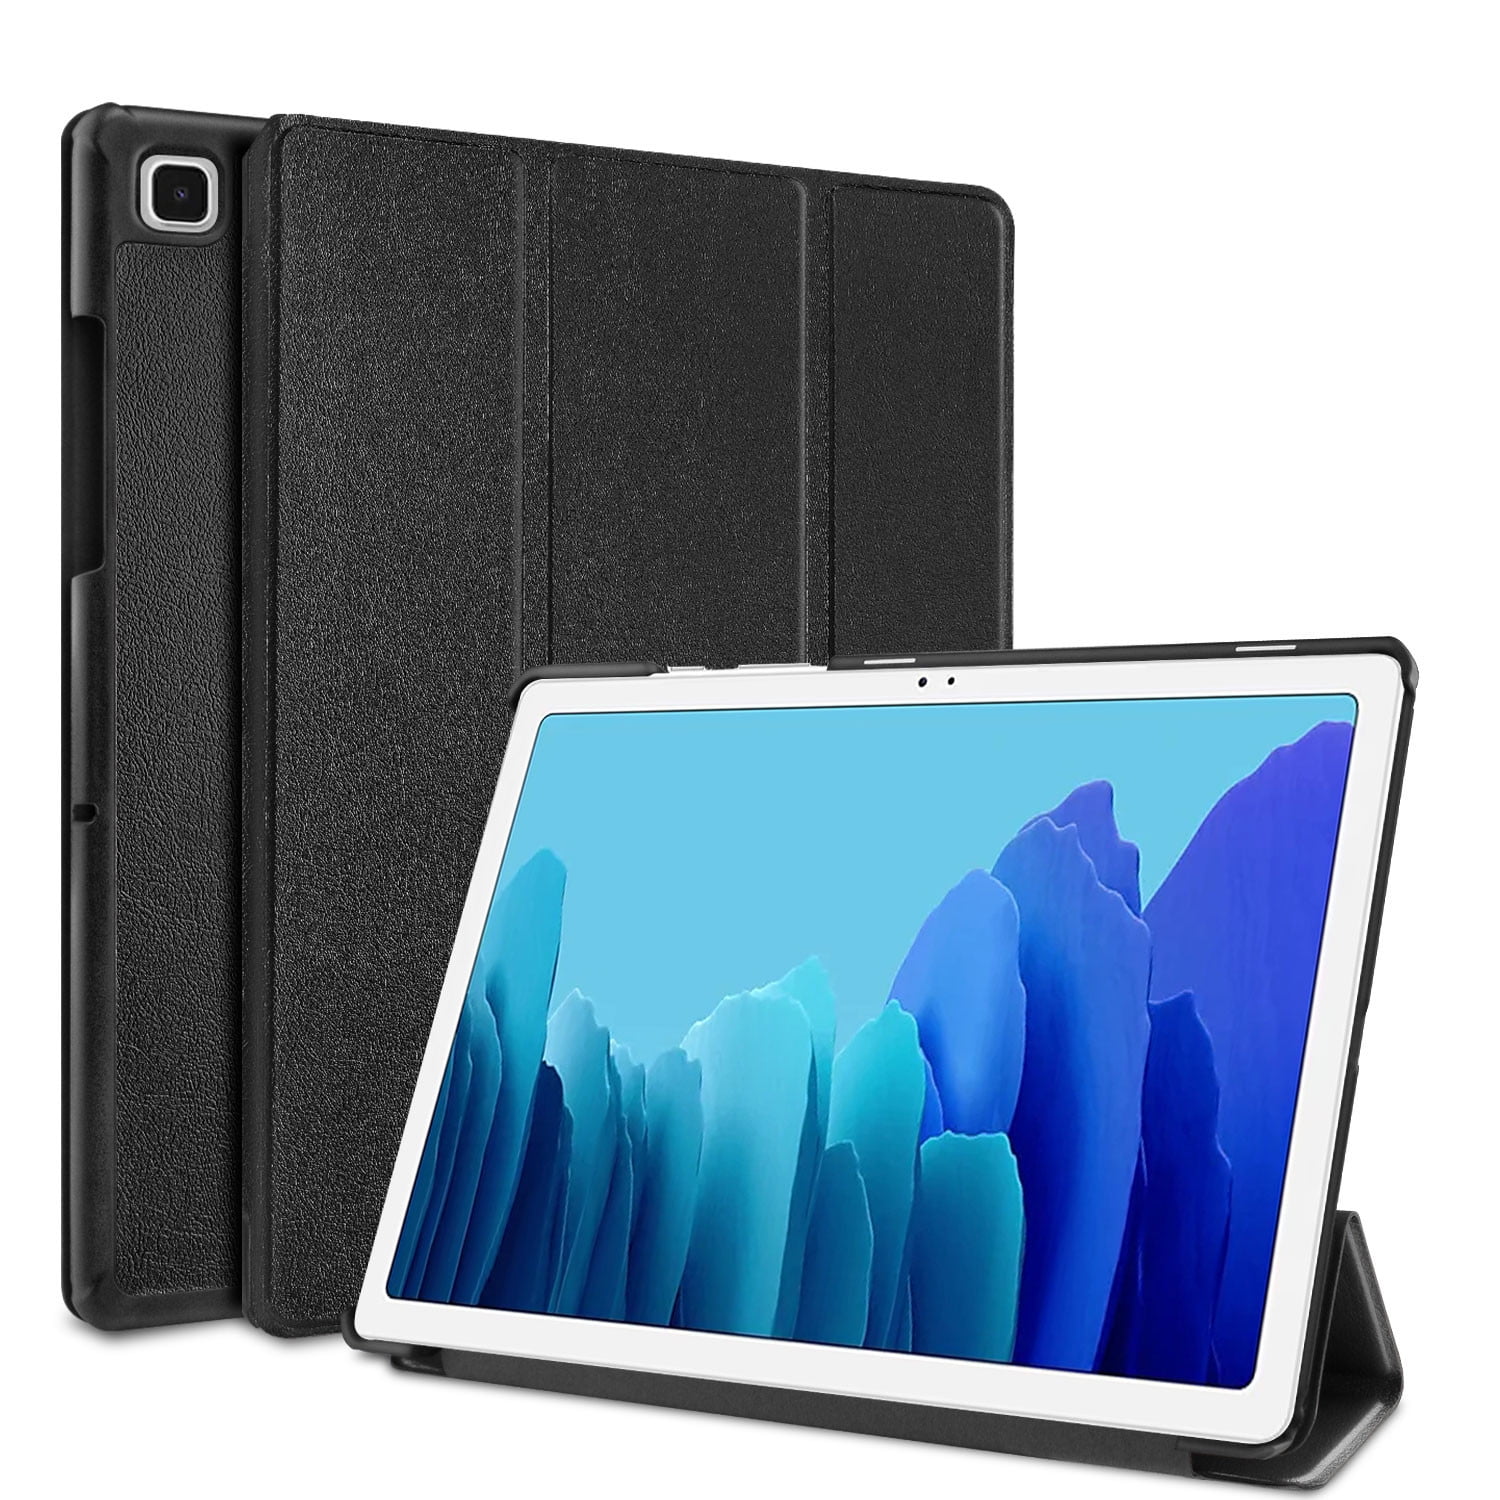 STYLUS SLOT PU LEATHER FOLIO PROTECTIVE SMART CASE For Lenovo Yoga Tablet 2 10-inch with Sleep/Awake Function COVER Hand Strap and Credit Cards / ID Holders 2 Screen Protectors and Stylus STAND with MICROFIBER INNER Dark BLUE.